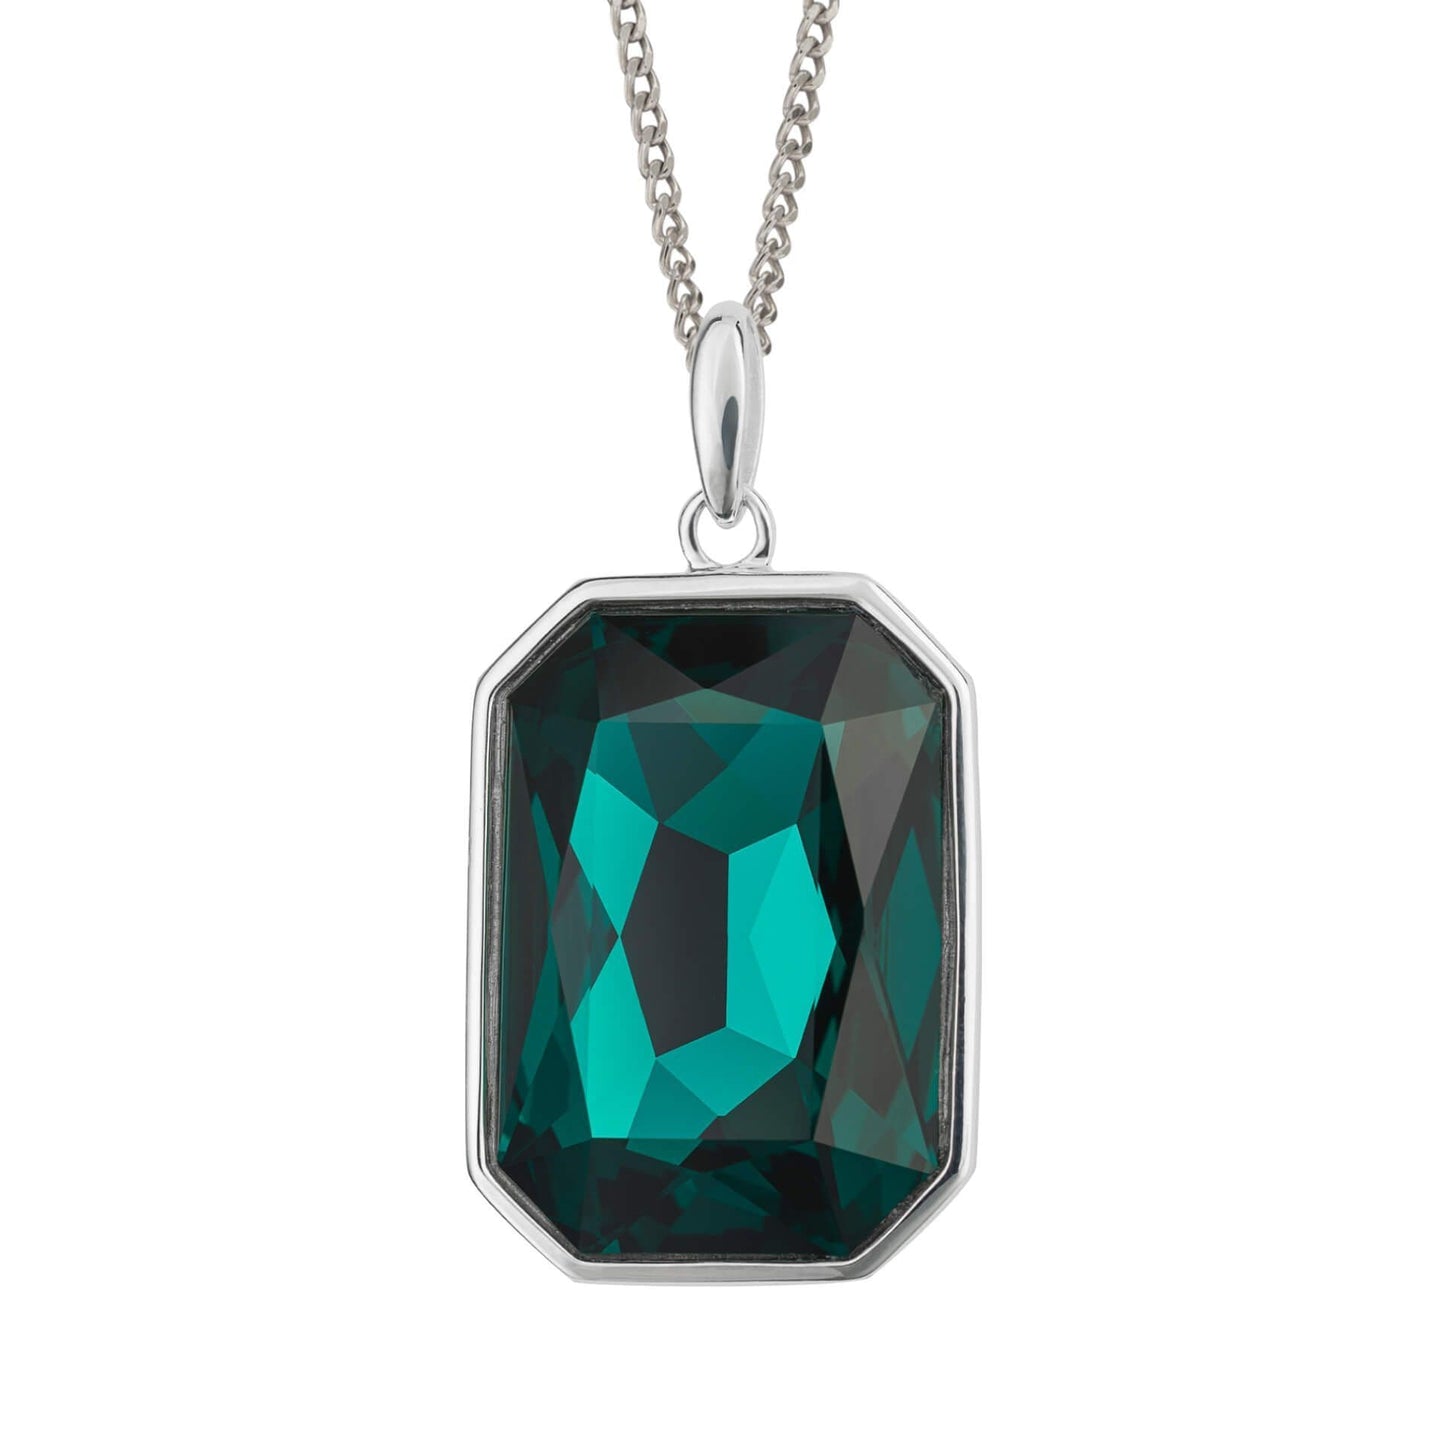 Large emerald green crystal octagonal necklace